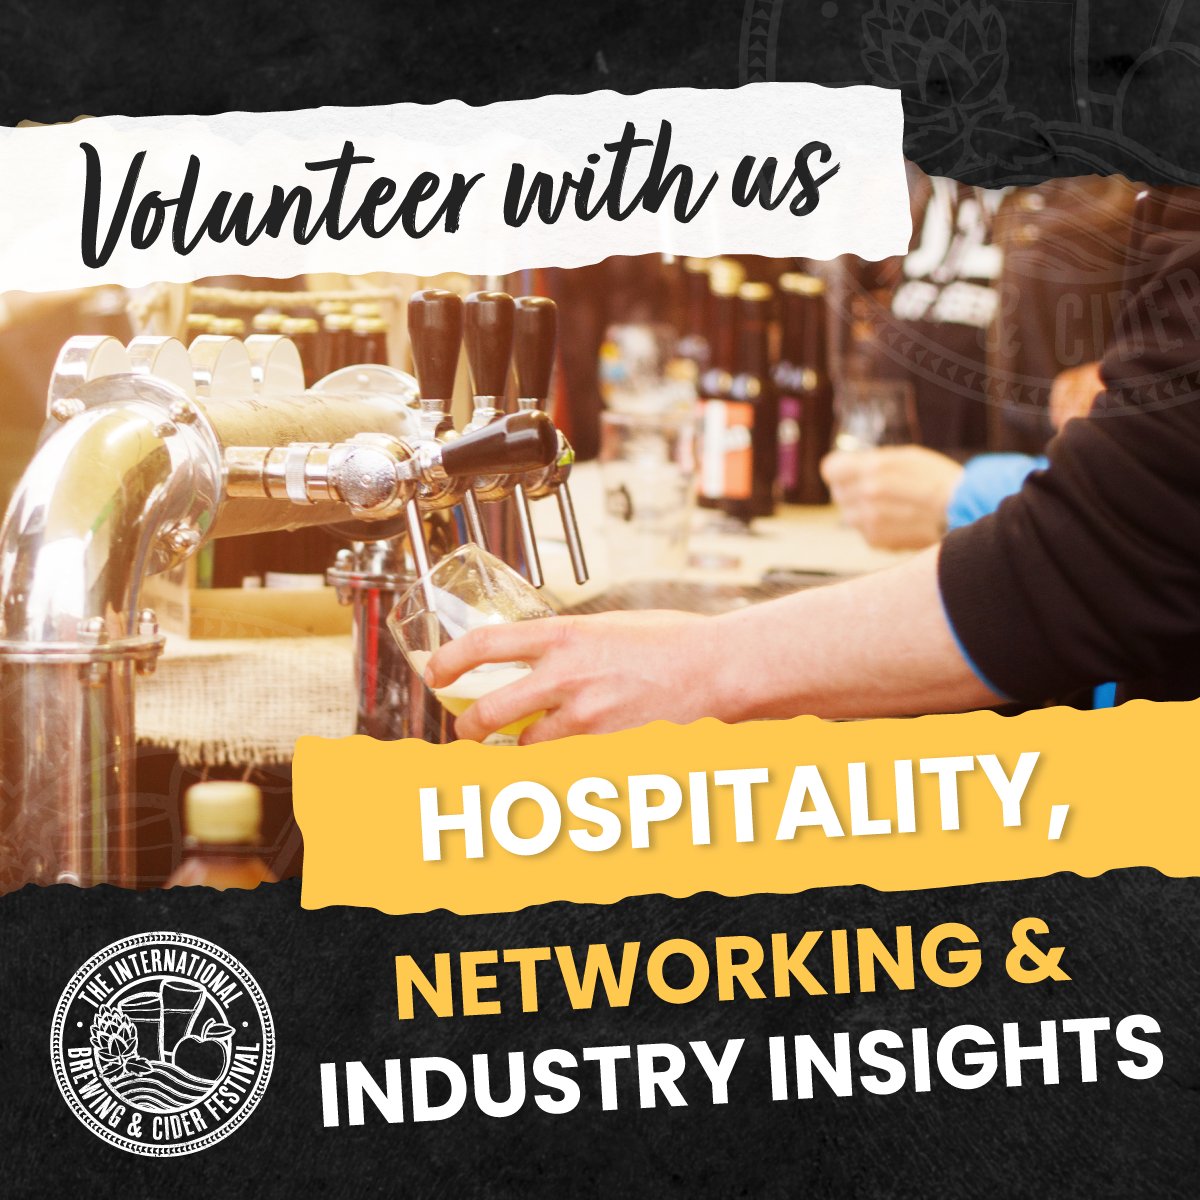 𝐕𝐎𝐋𝐔𝐍𝐓𝐄𝐄𝐑𝐒 𝐖𝐄𝐋𝐂𝐎𝐌𝐄 🤝❤️ We’re on the lookout for passionate volunteers to join our fantastic team at this year’s International Brewing & Cider Festival: ibcfest.com/volunteer/